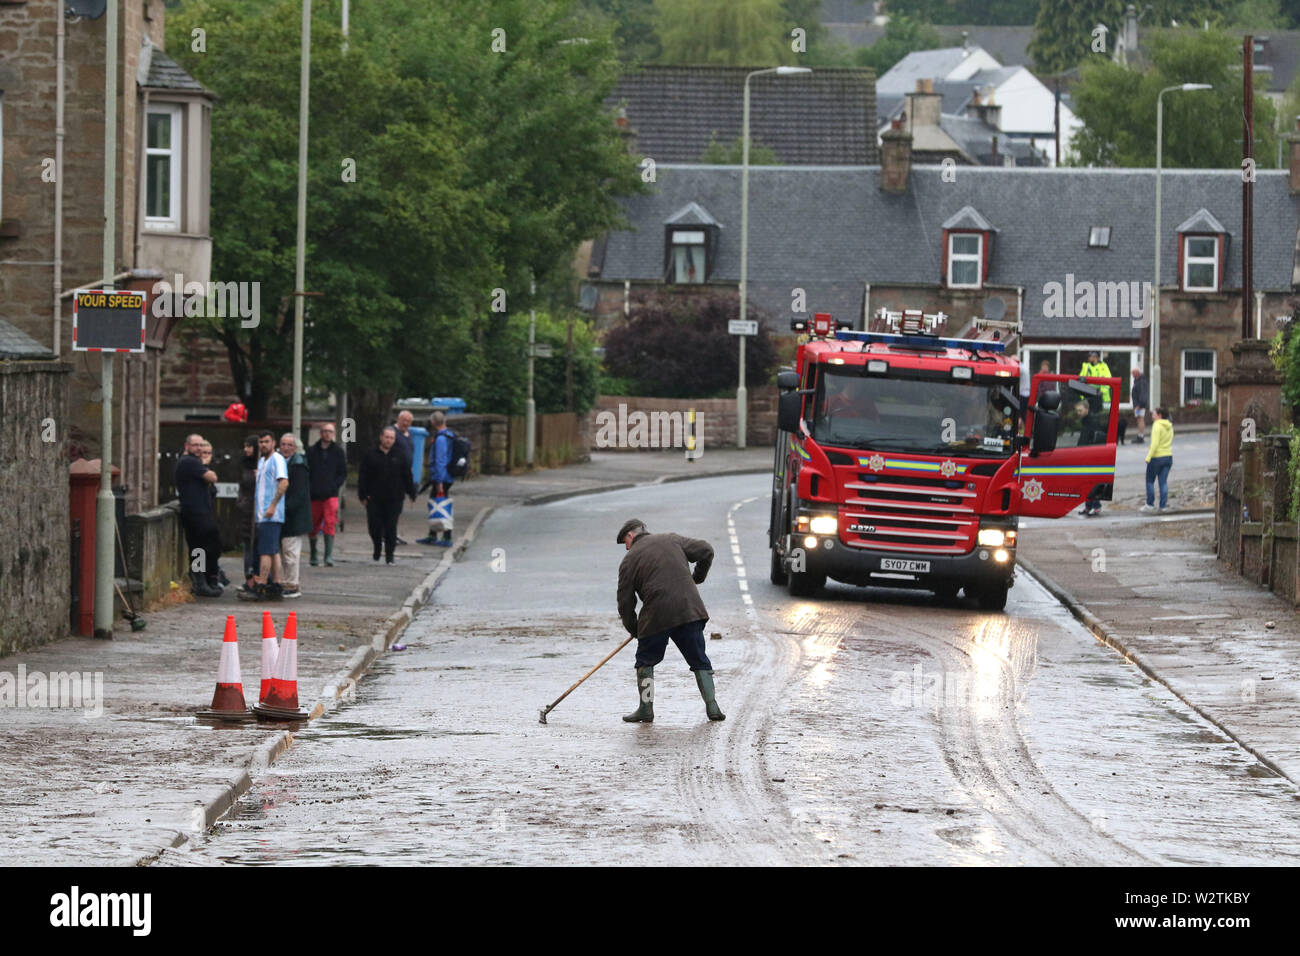 Dingwall, UK. 10th July, 2019. Flash flooding struck several streets in Dingwall, causing road closures and damage to property. Pictured is the clean-up operation on Burn Place. Credit: Andrew Smith/Alamy Live News Stock Photo